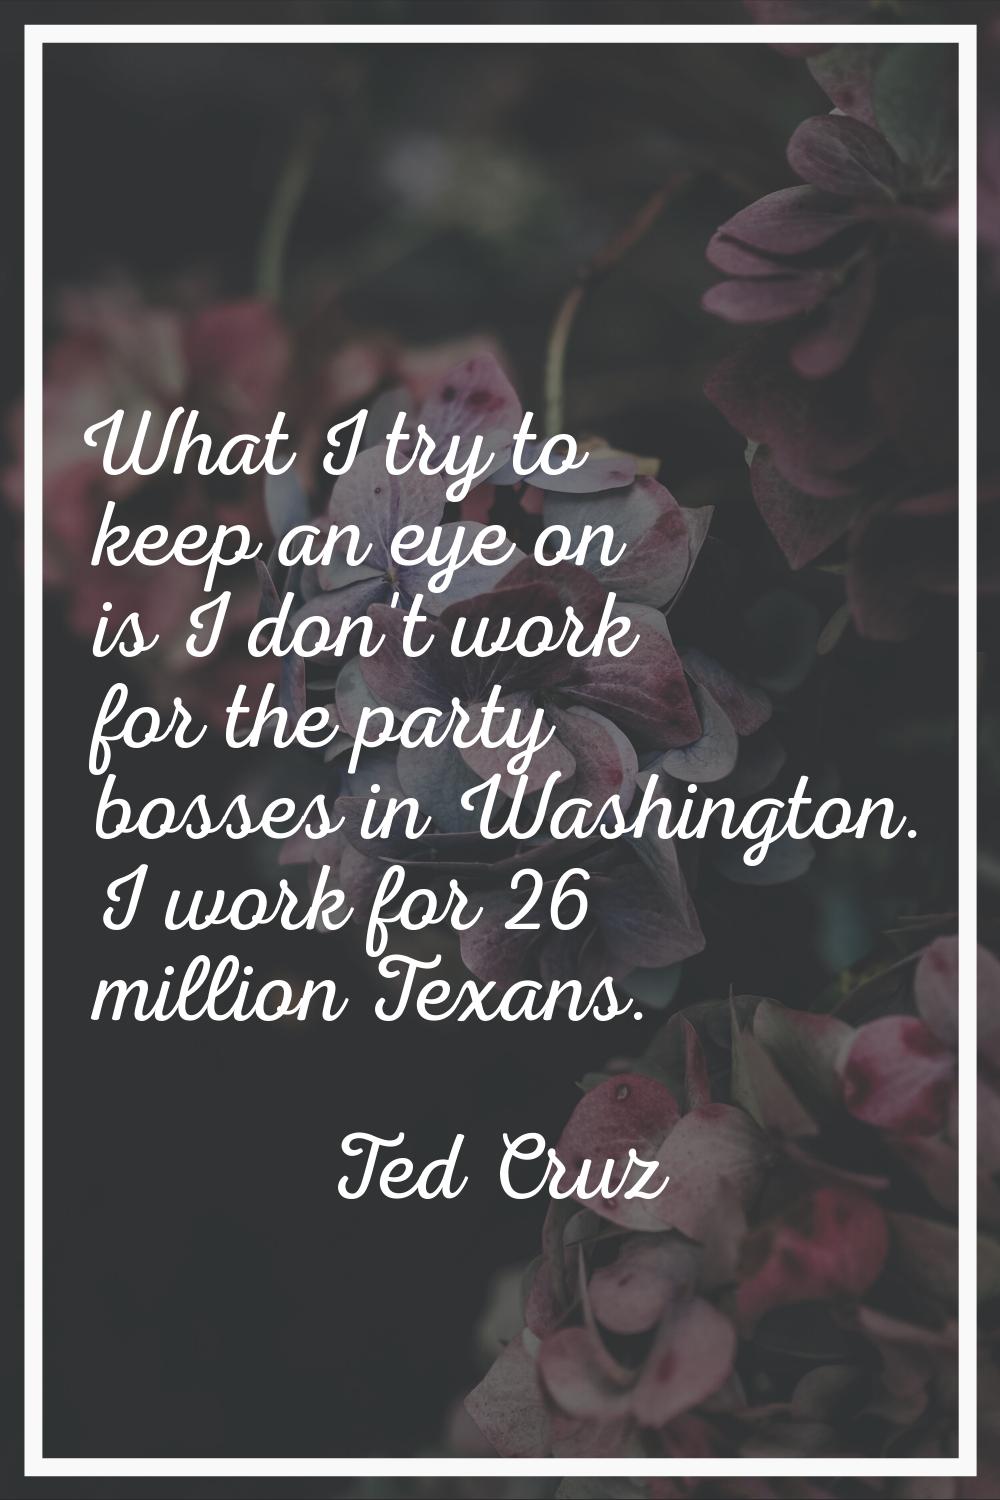 What I try to keep an eye on is I don't work for the party bosses in Washington. I work for 26 mill